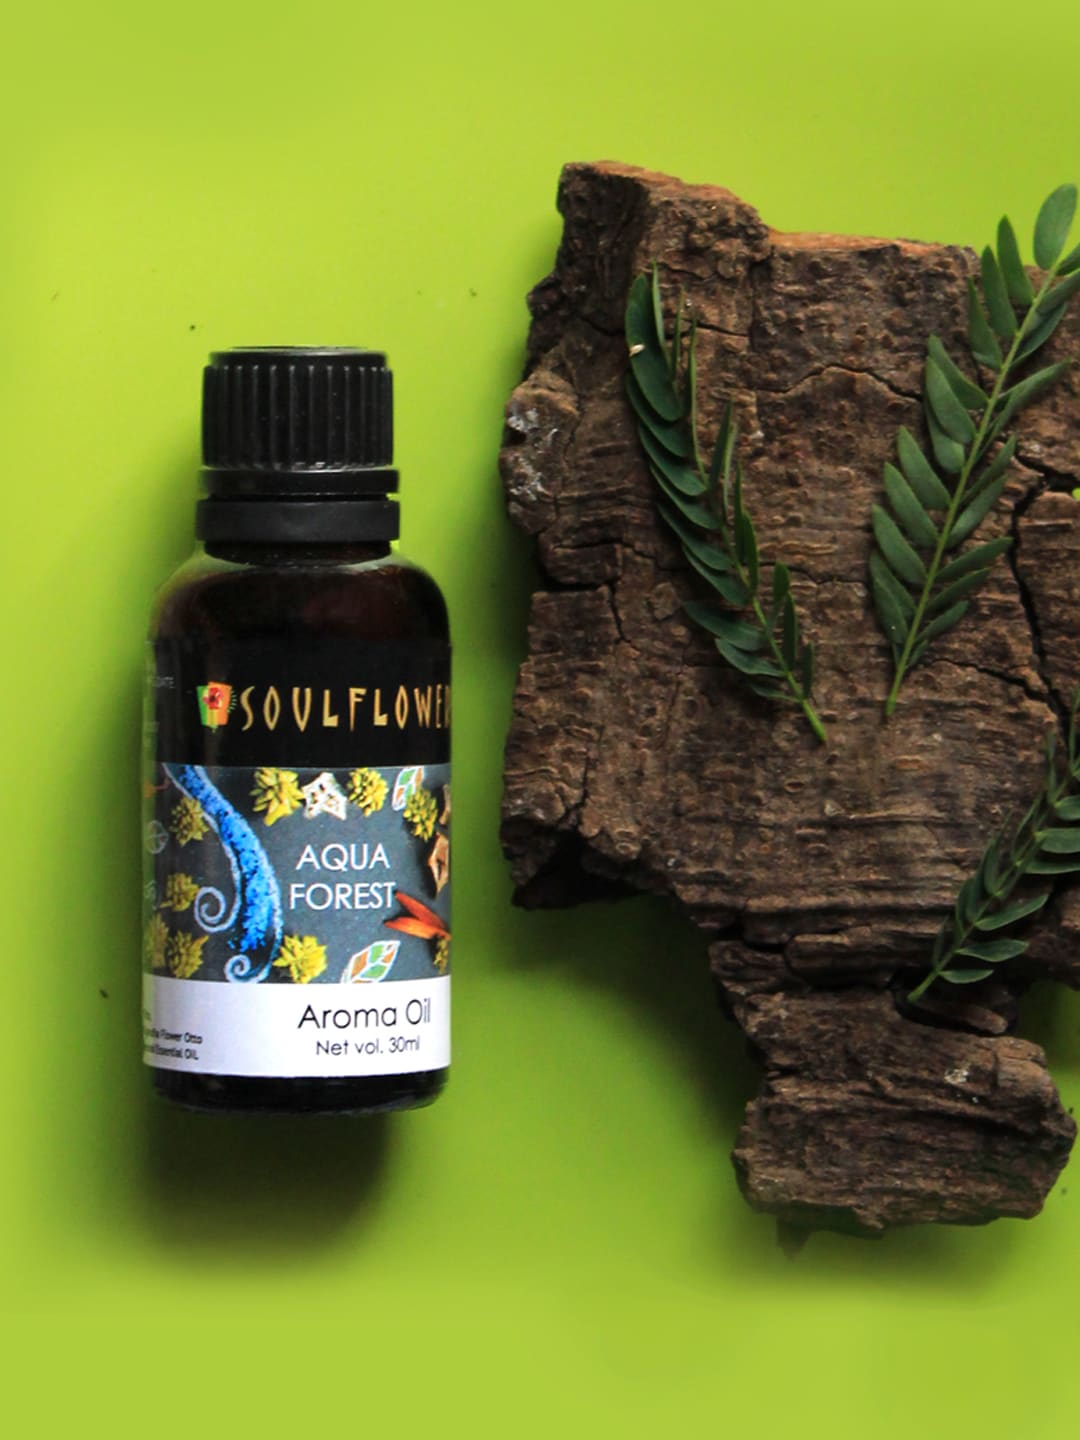 Soulflower Aqua Forest Aroma Oil 30ml Price in India